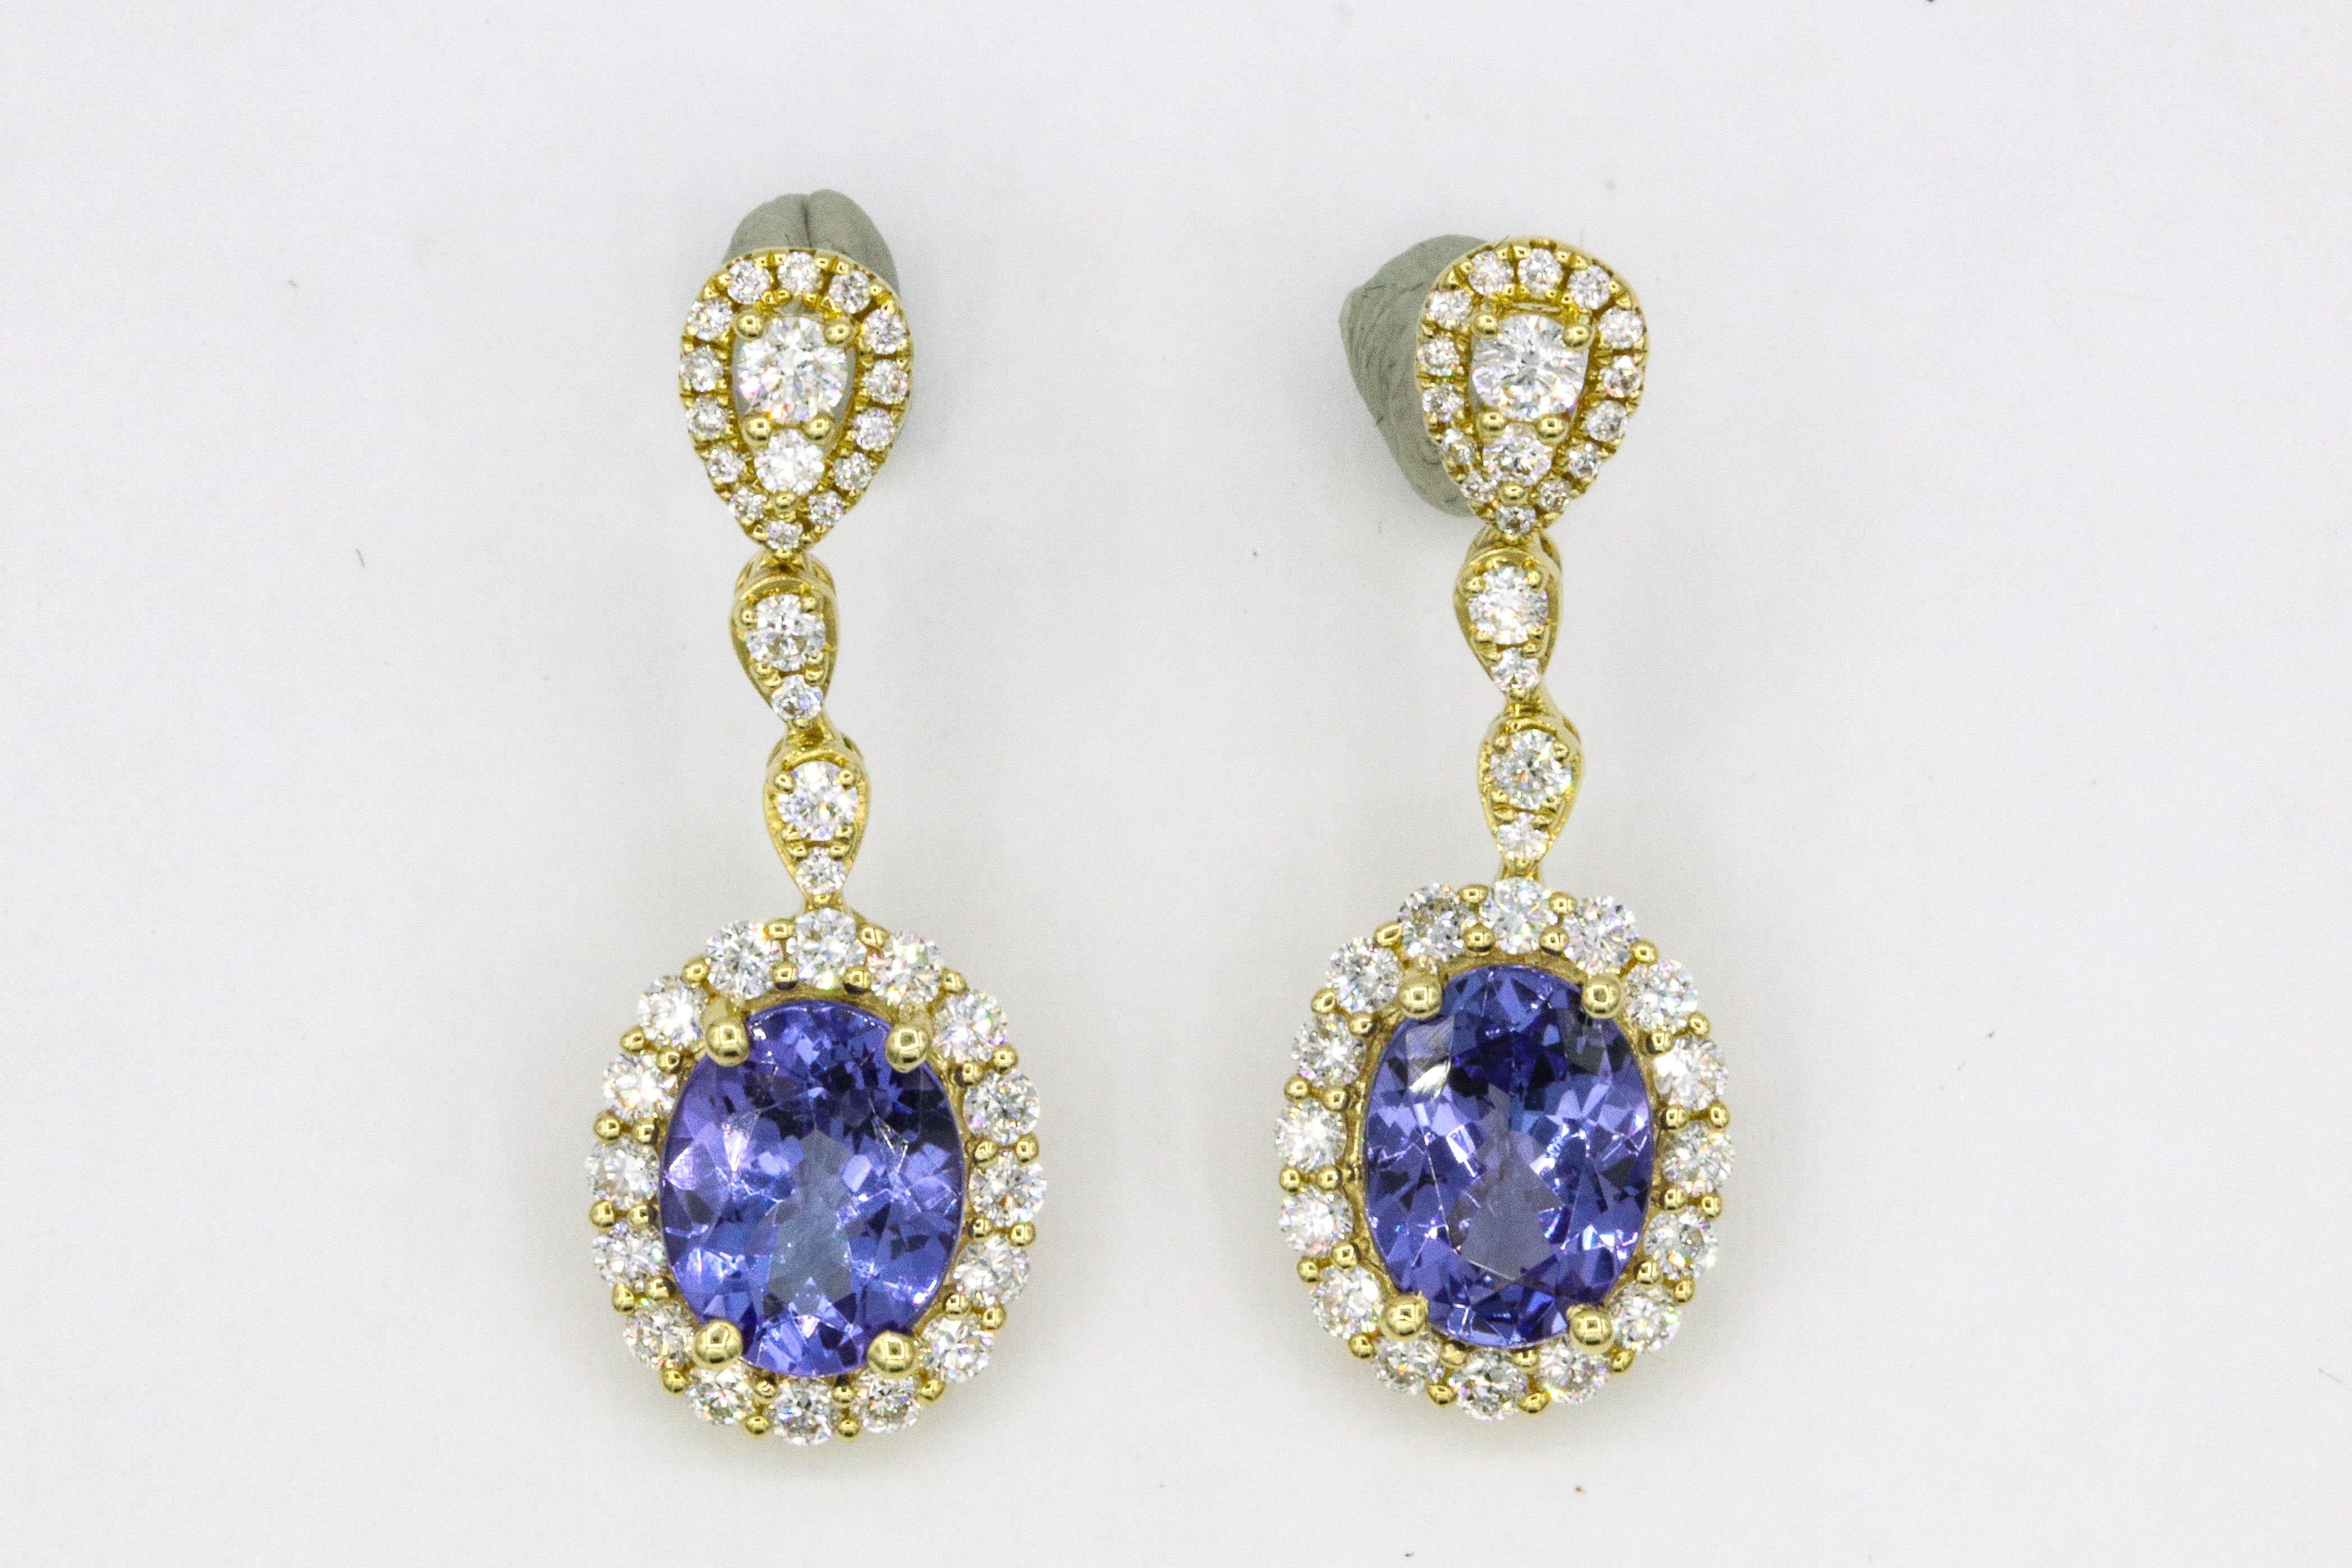 18K Yellow gold earrings featuring two oval shape tanzanites, 3.30 carats, surrounded by round brilliants weighing 1.13 carats.
Color G-H
Clarity SI
Measures 9 x 7 mm